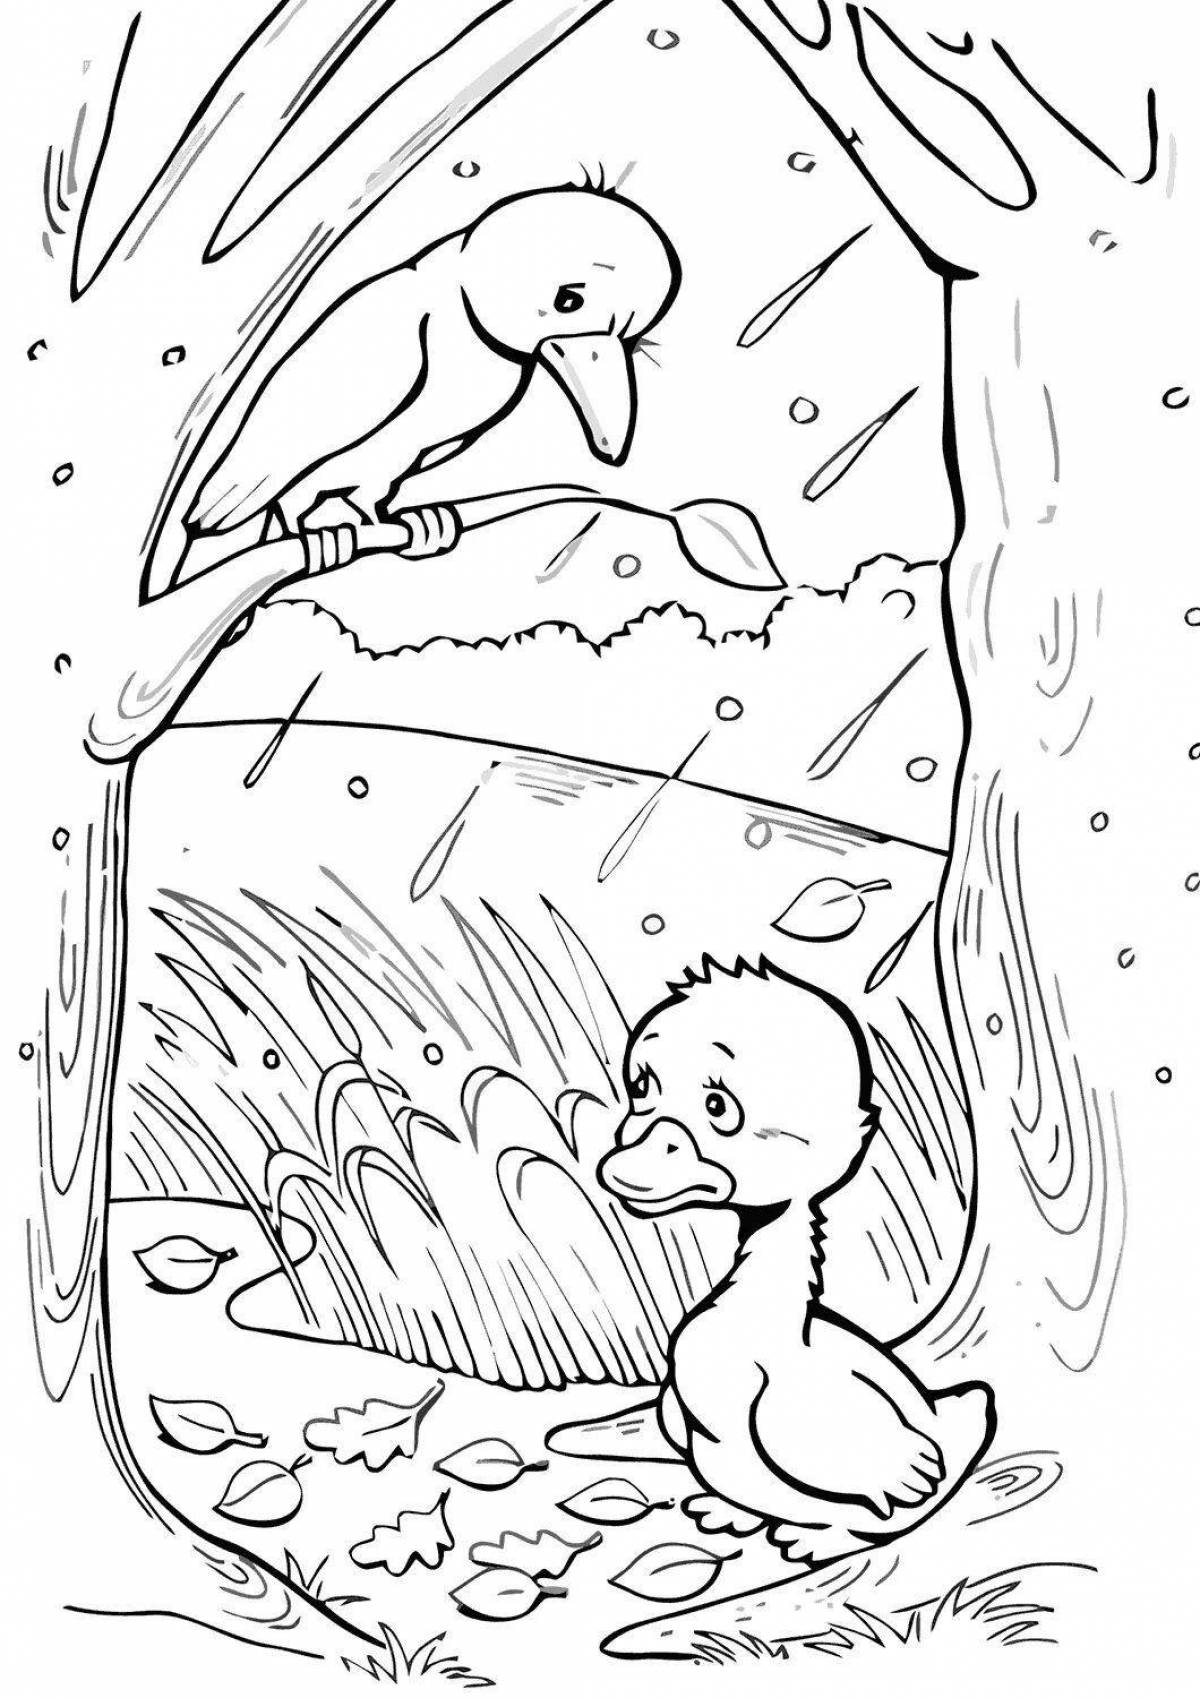 Coloring book sweet duckling